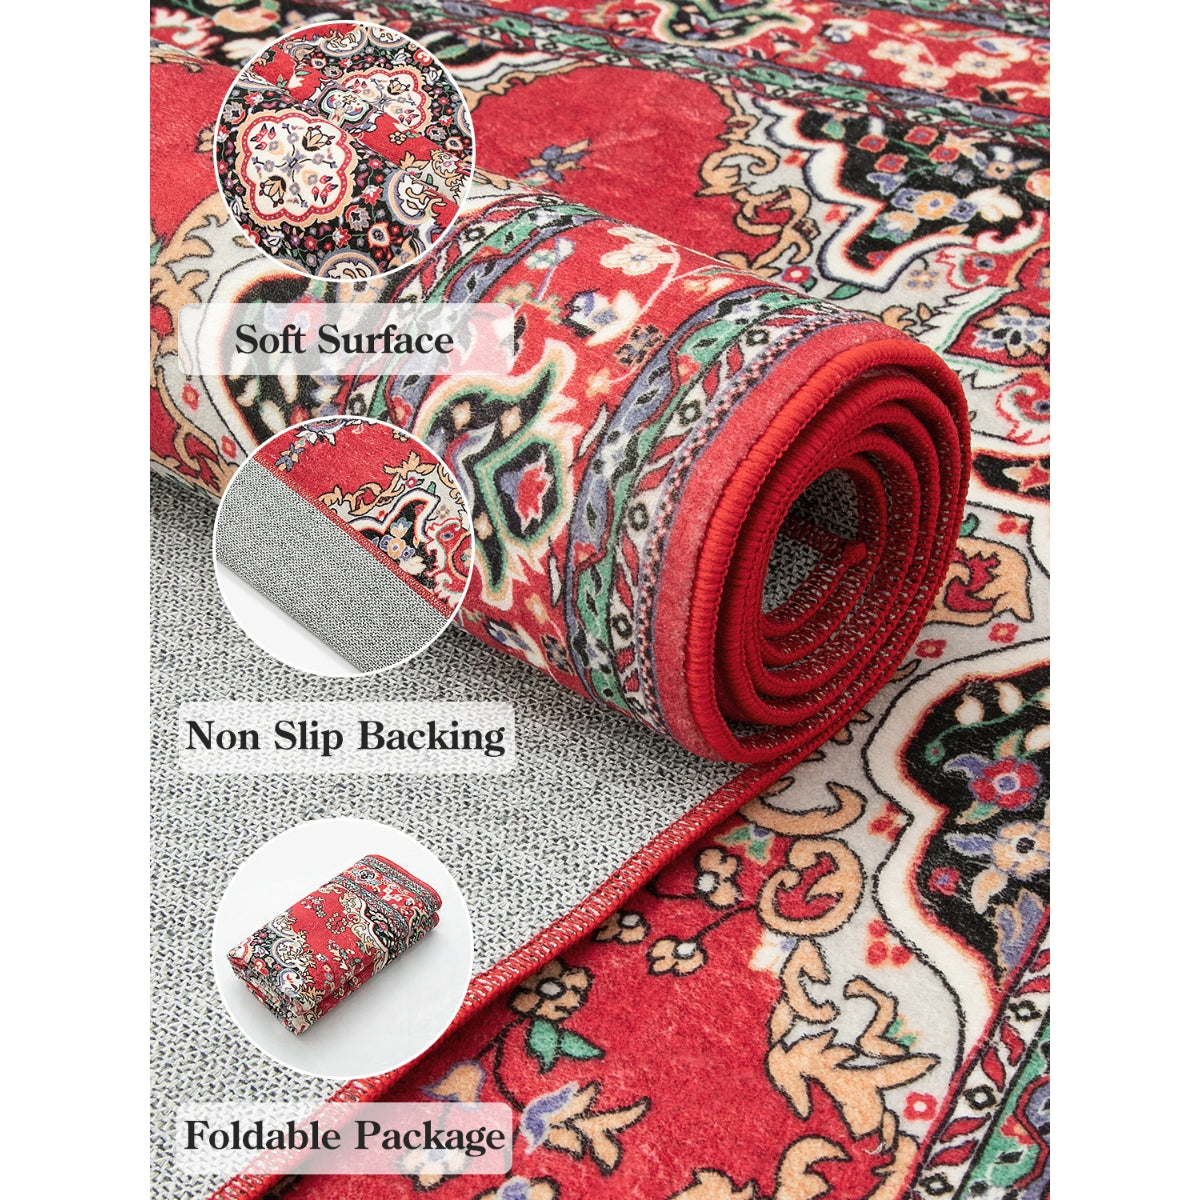 Royal Luxury Traditional Oriental Medallion Red Area Rug